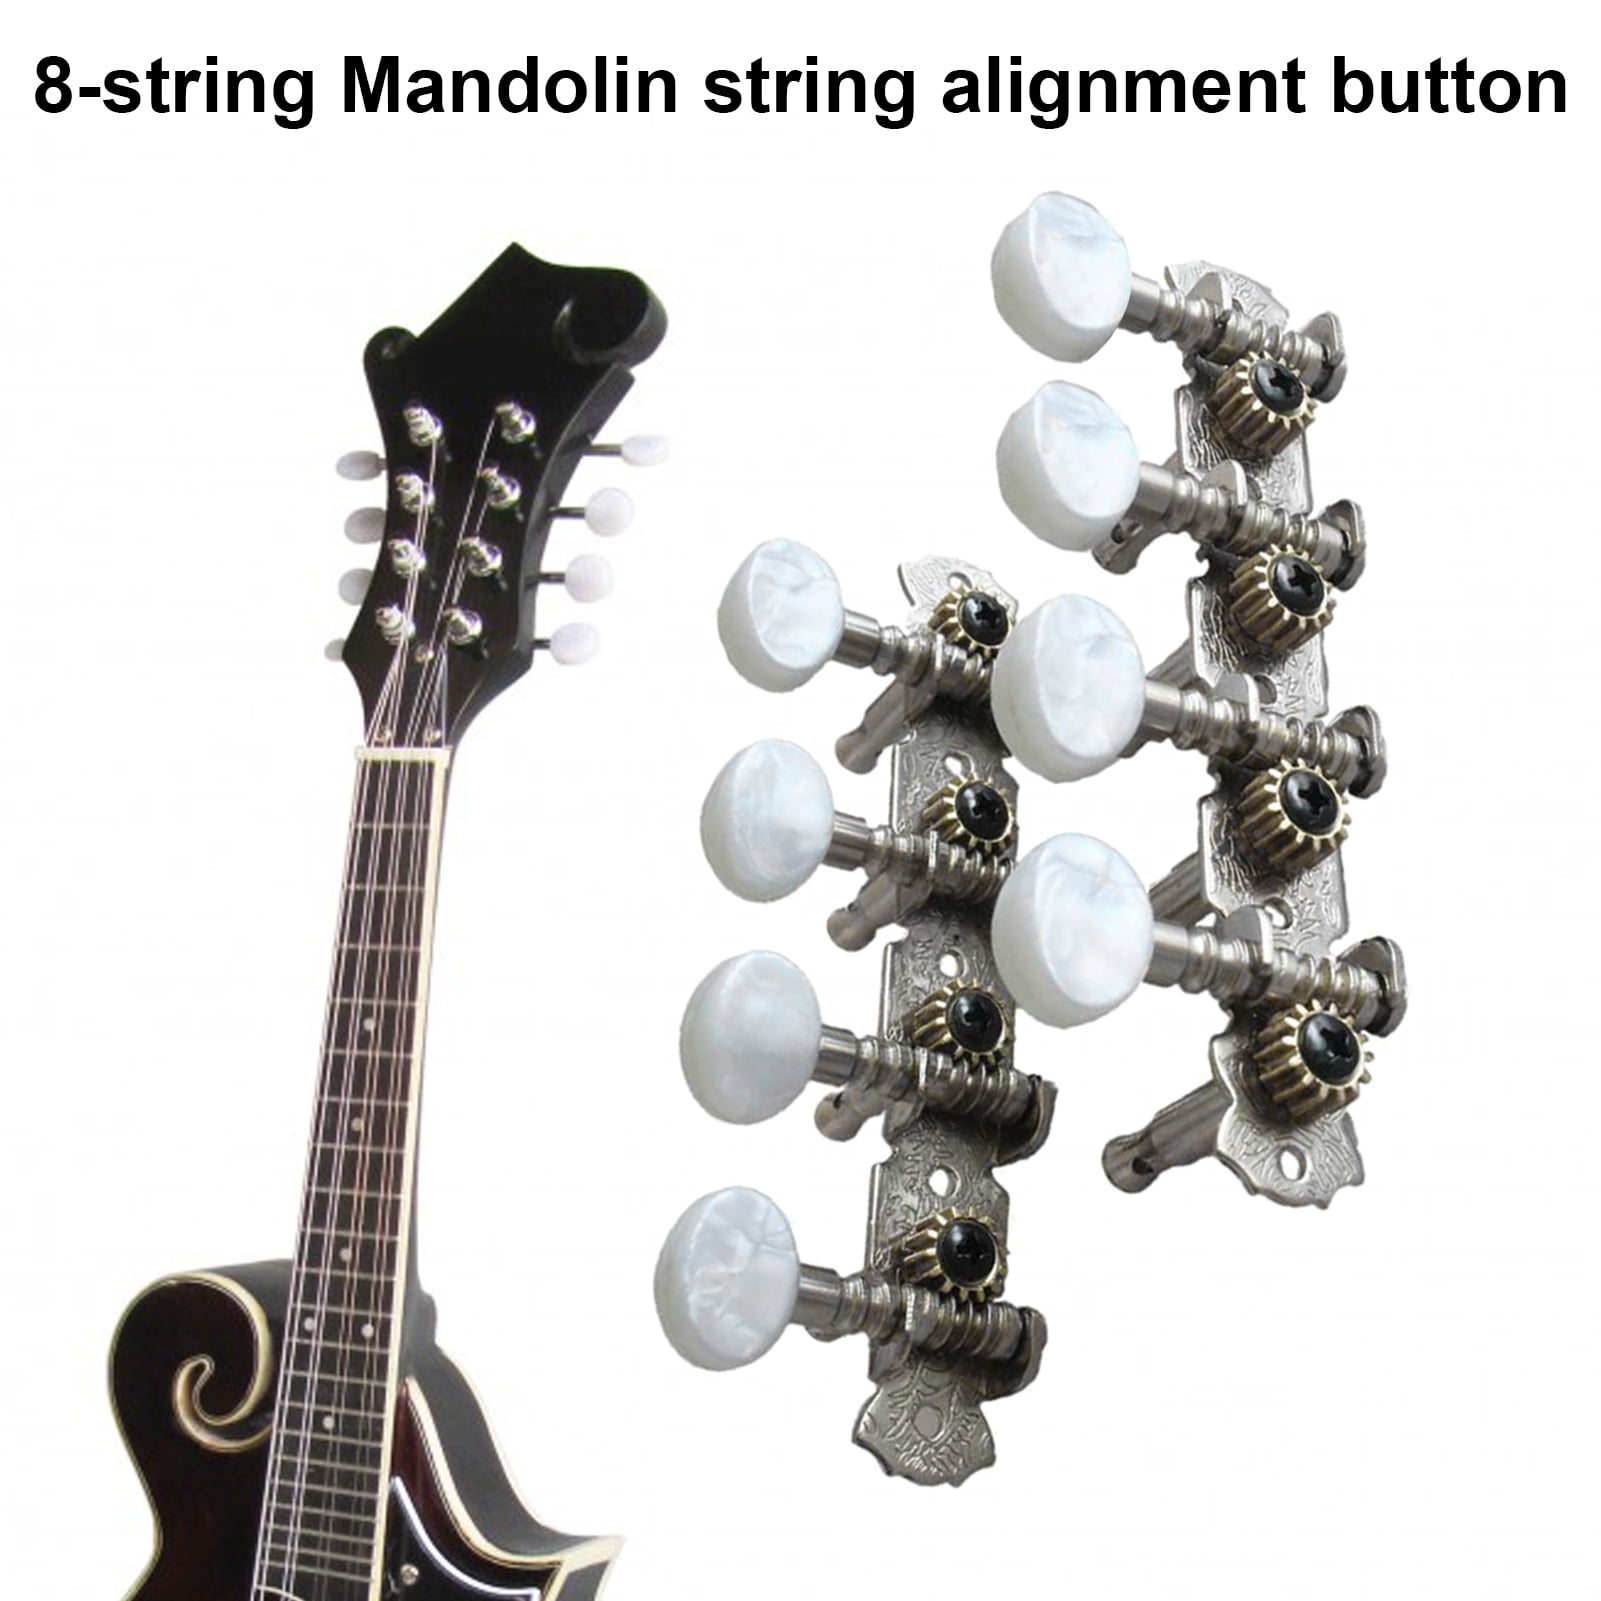 Color : Silver DINGGUANGHE Mandoline 4L4R Mandolin String Tuning Pegs Machine Heads Tuners for 8 Strings Mandolin Instruments Accessory 